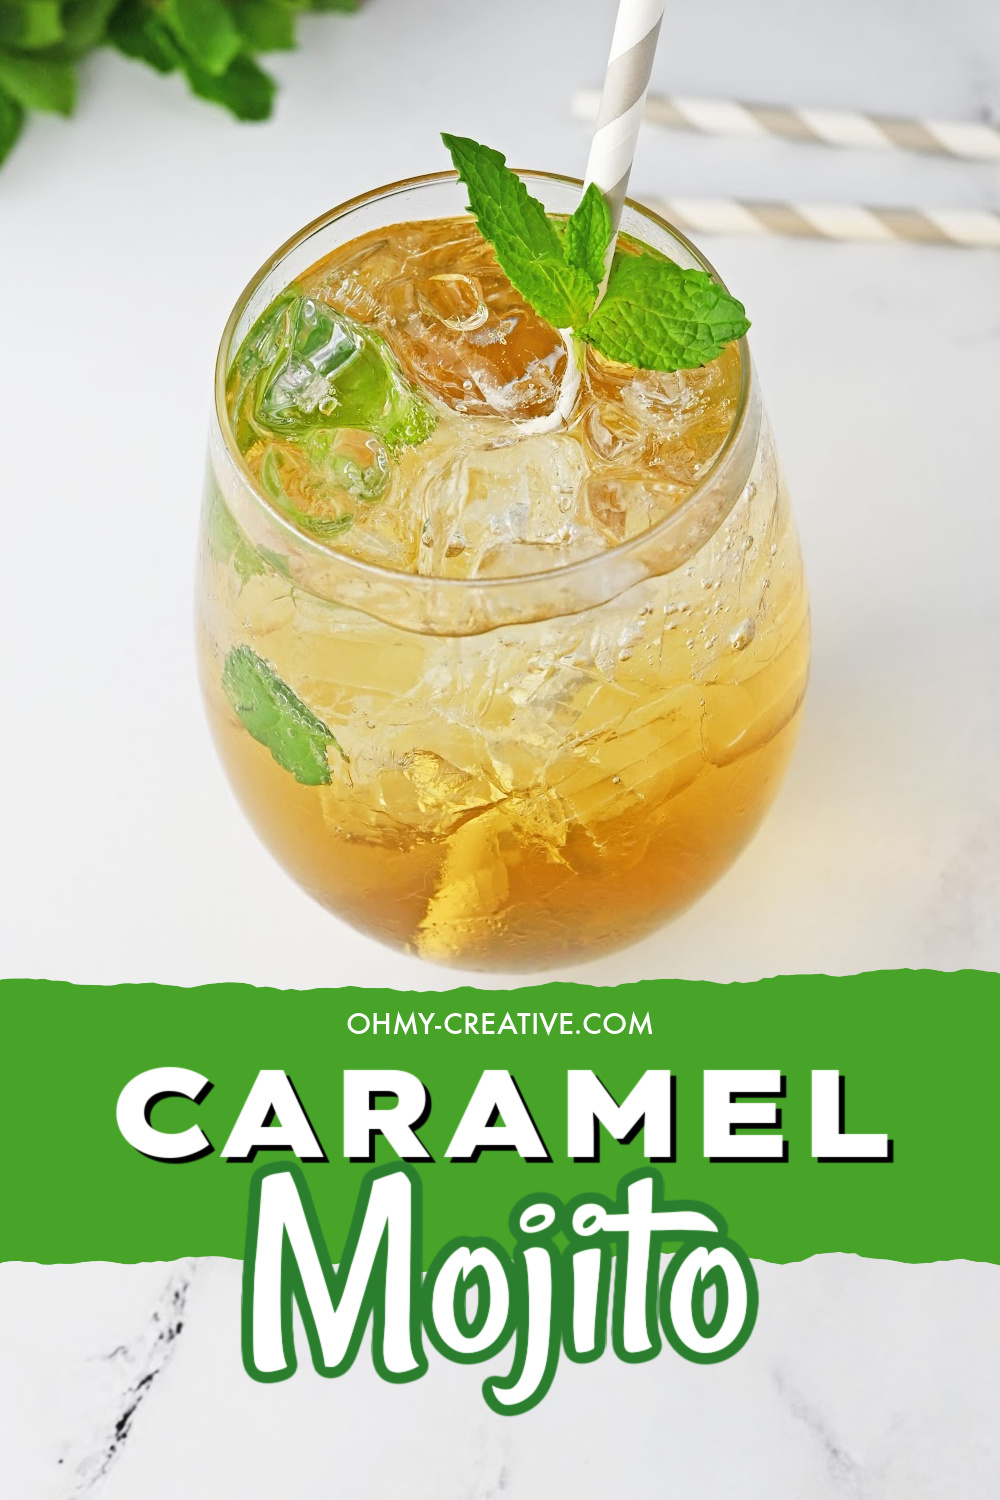 A caramel mojito cocktail garnished with mint and a straw. Pinterest image